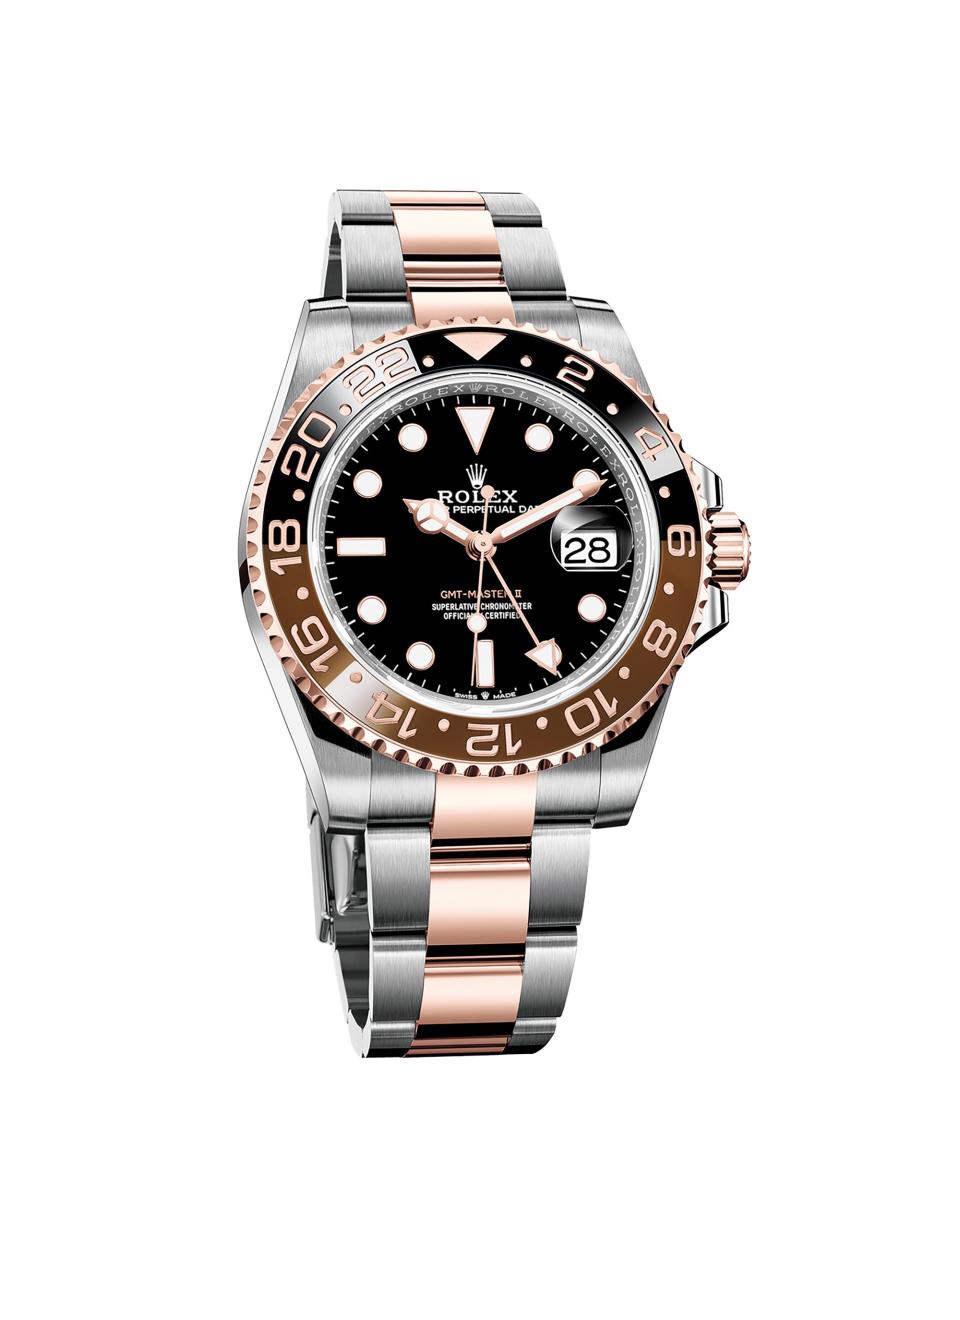 Rolex GMT Master II in Oystersteel and 18ct Everose gold (£10,350)